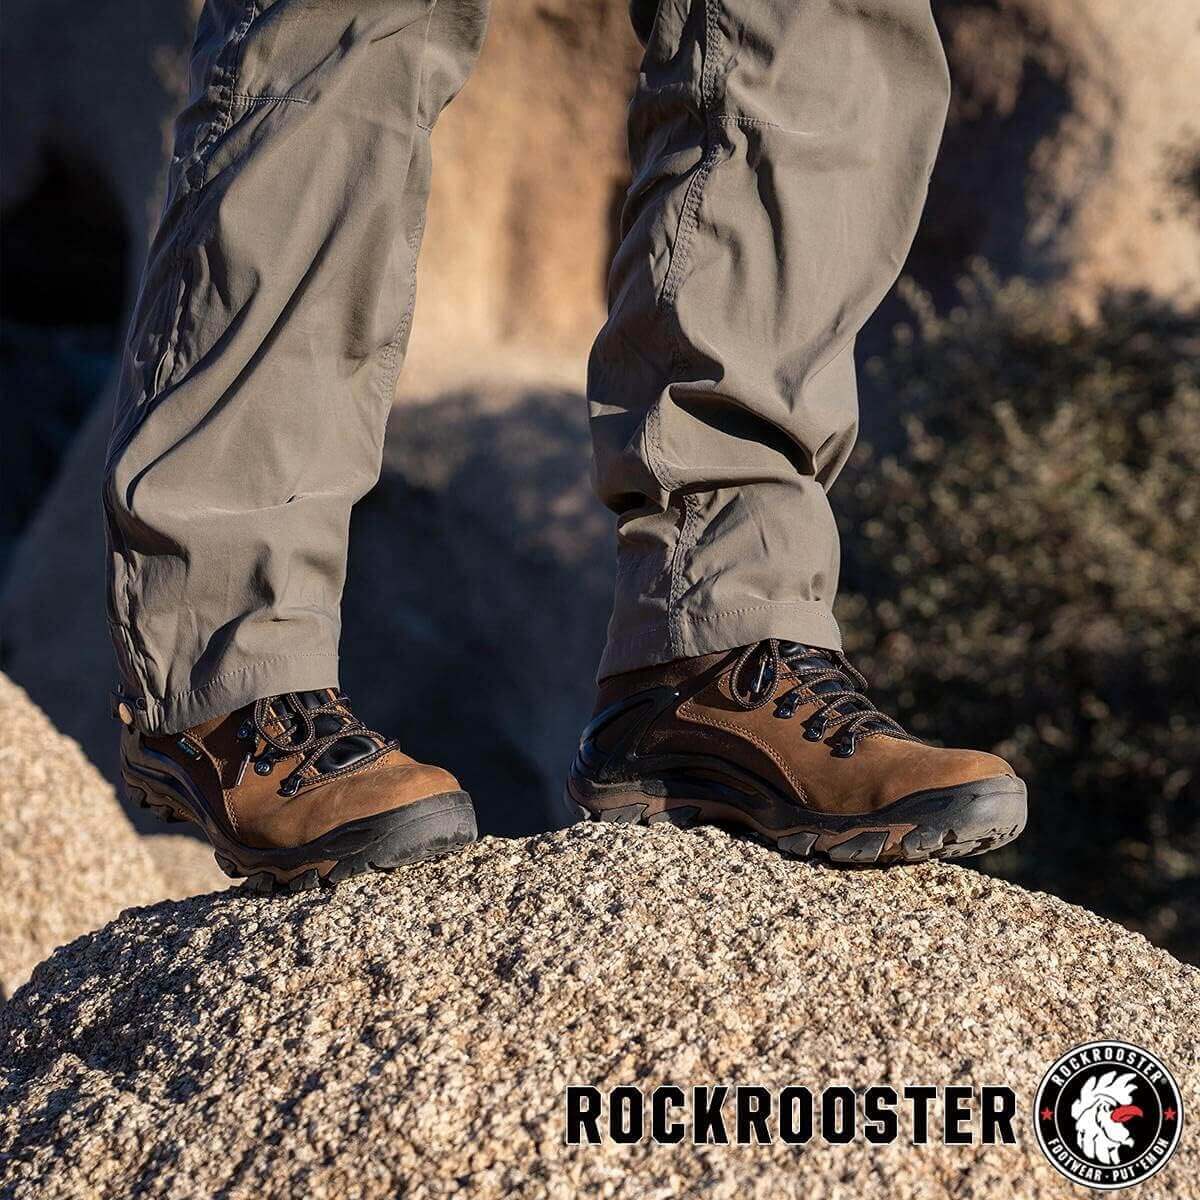 Shop The Latest >ROCKROOSTER Farland Waterproof Hiking Shoes for Men > *Only $118.99*> From The Top Brand > *Rockroosterl* > Shop Now and Get Free Shipping On Orders Over $45.00 >*Shop Earth Foot*